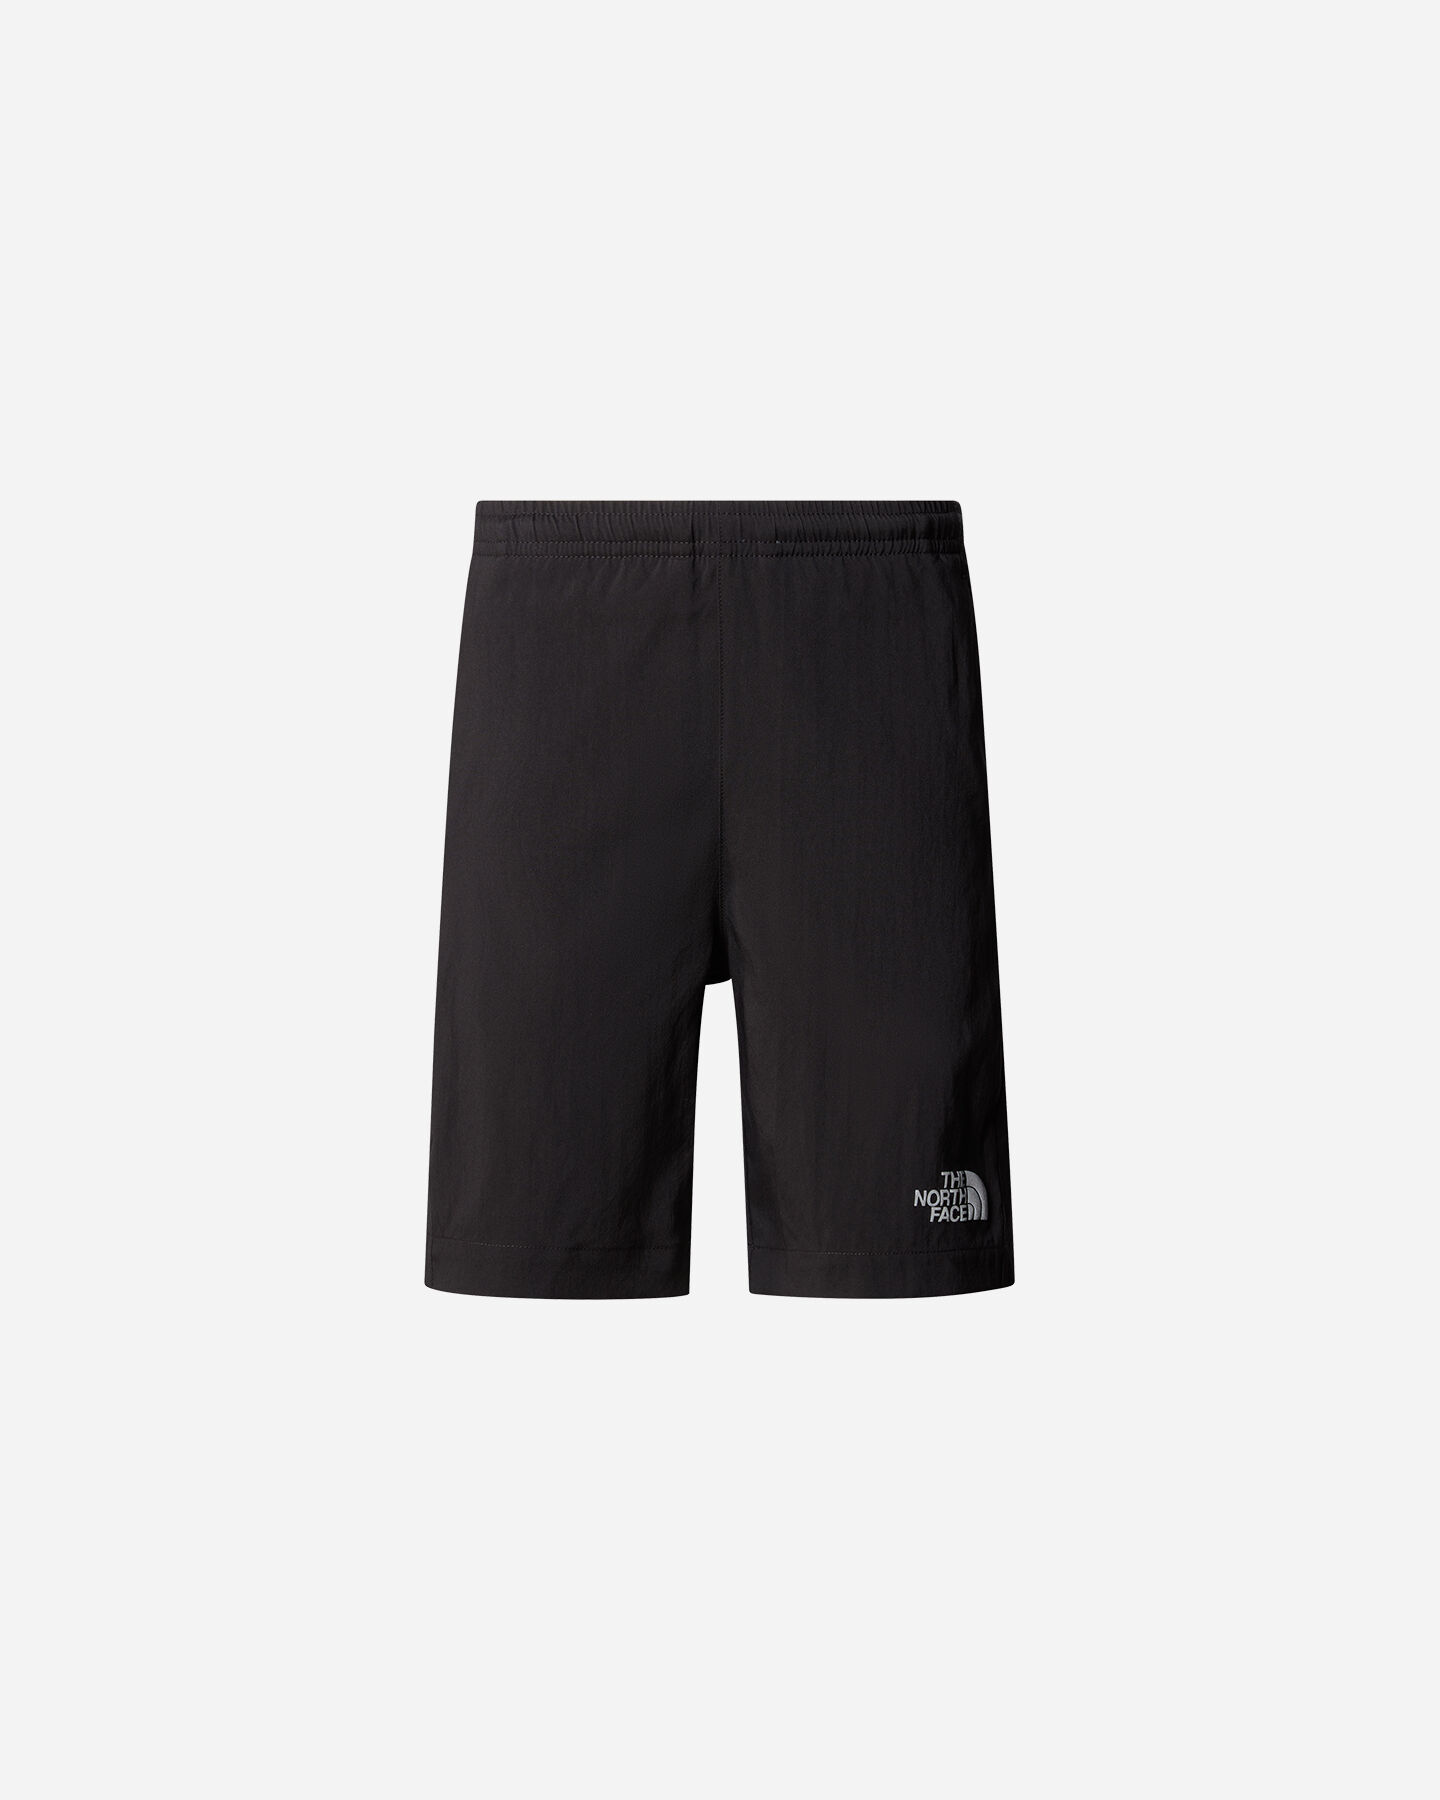  Pantaloncini THE NORTH FACE REACTOR JR S5651394|KT0|S scatto 0